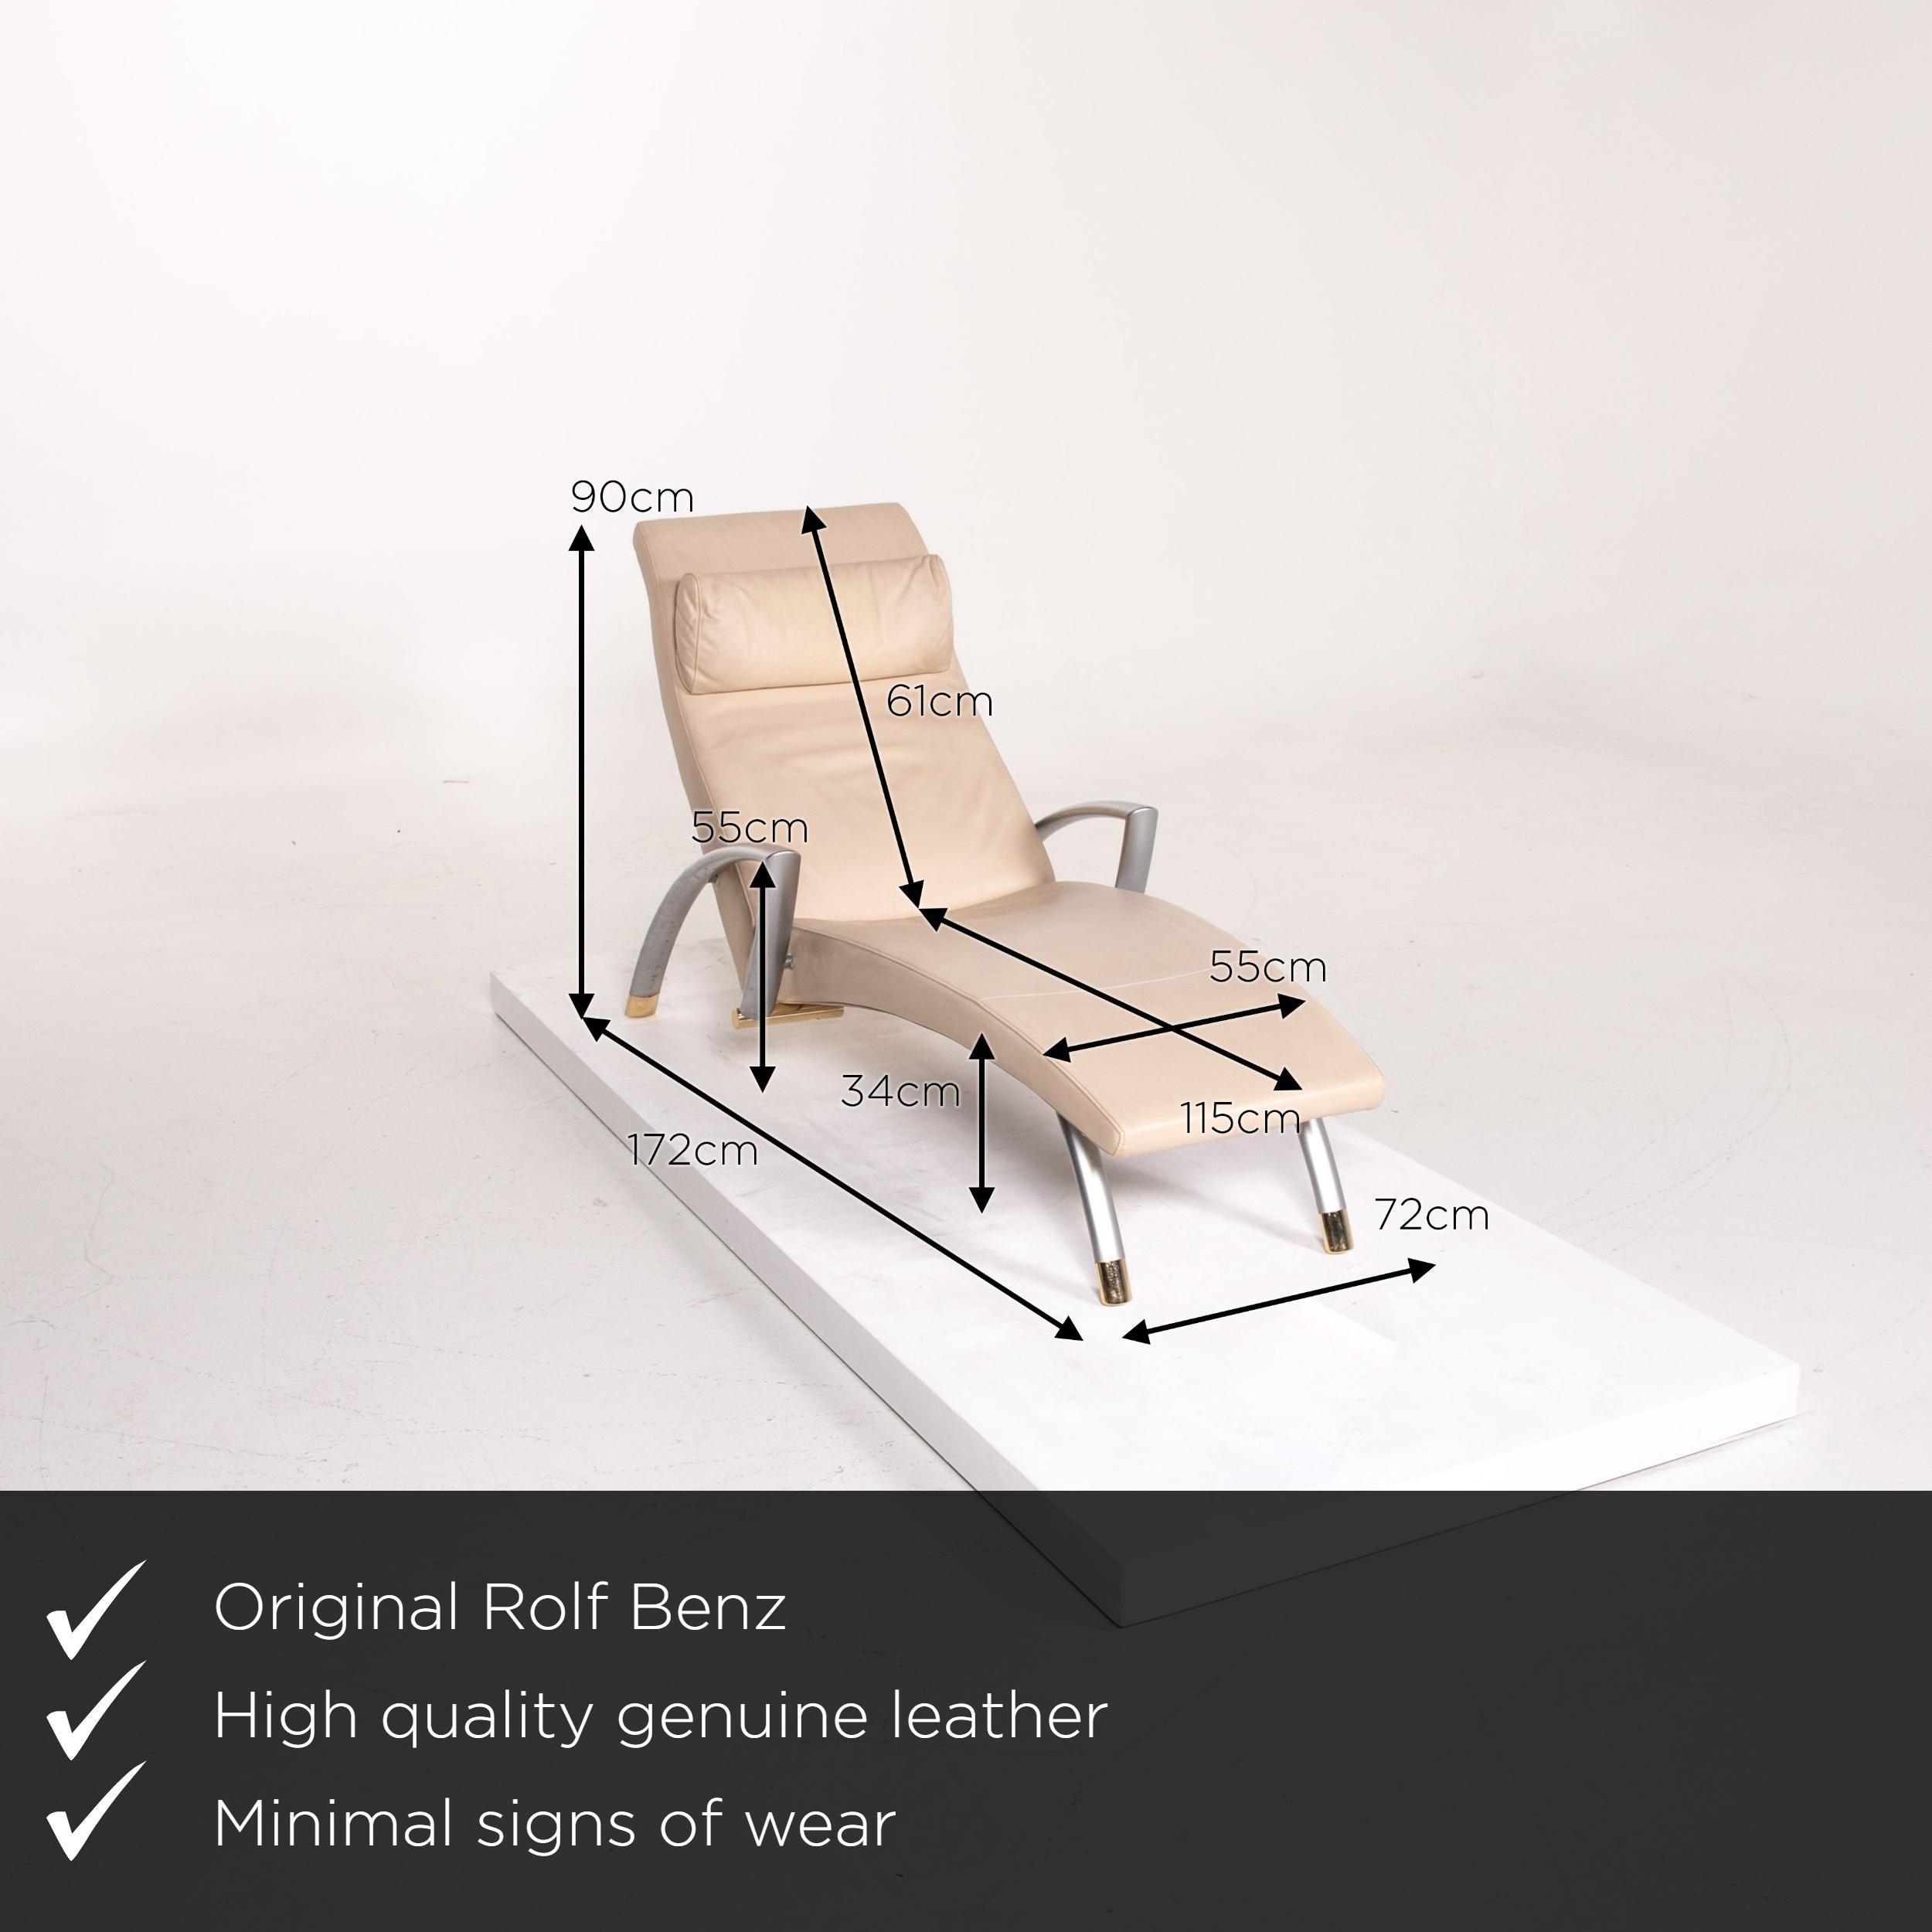 We present to you a Rolf Benz 2600 leather daybed cream.
 

 Product measurements in centimeters:
 

Depth 172
Width 72
Height 90
Seat height 34
Rest height 55
Seat depth 115
Seat width 55
Back height 61.
 